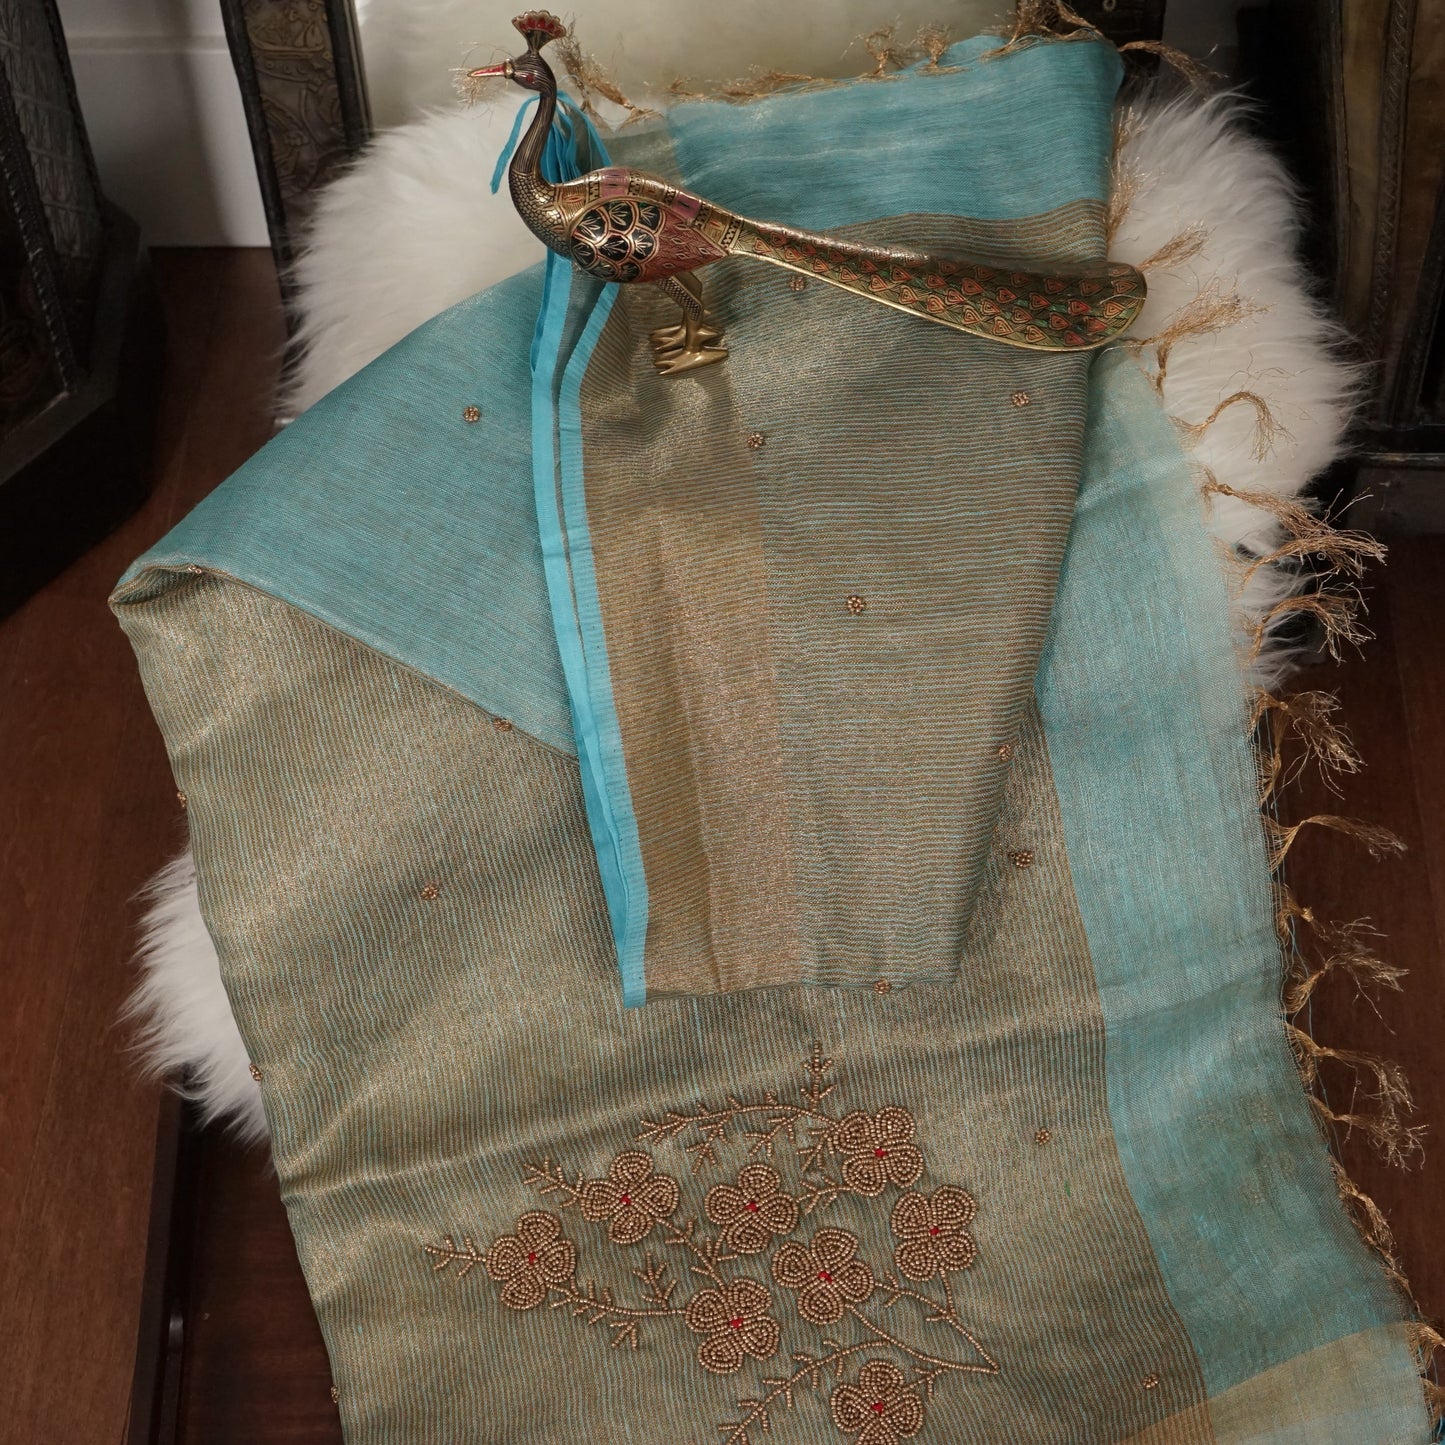 Organic Pastel Powder Blue Tissue Linen Saree with Hand Embroidery